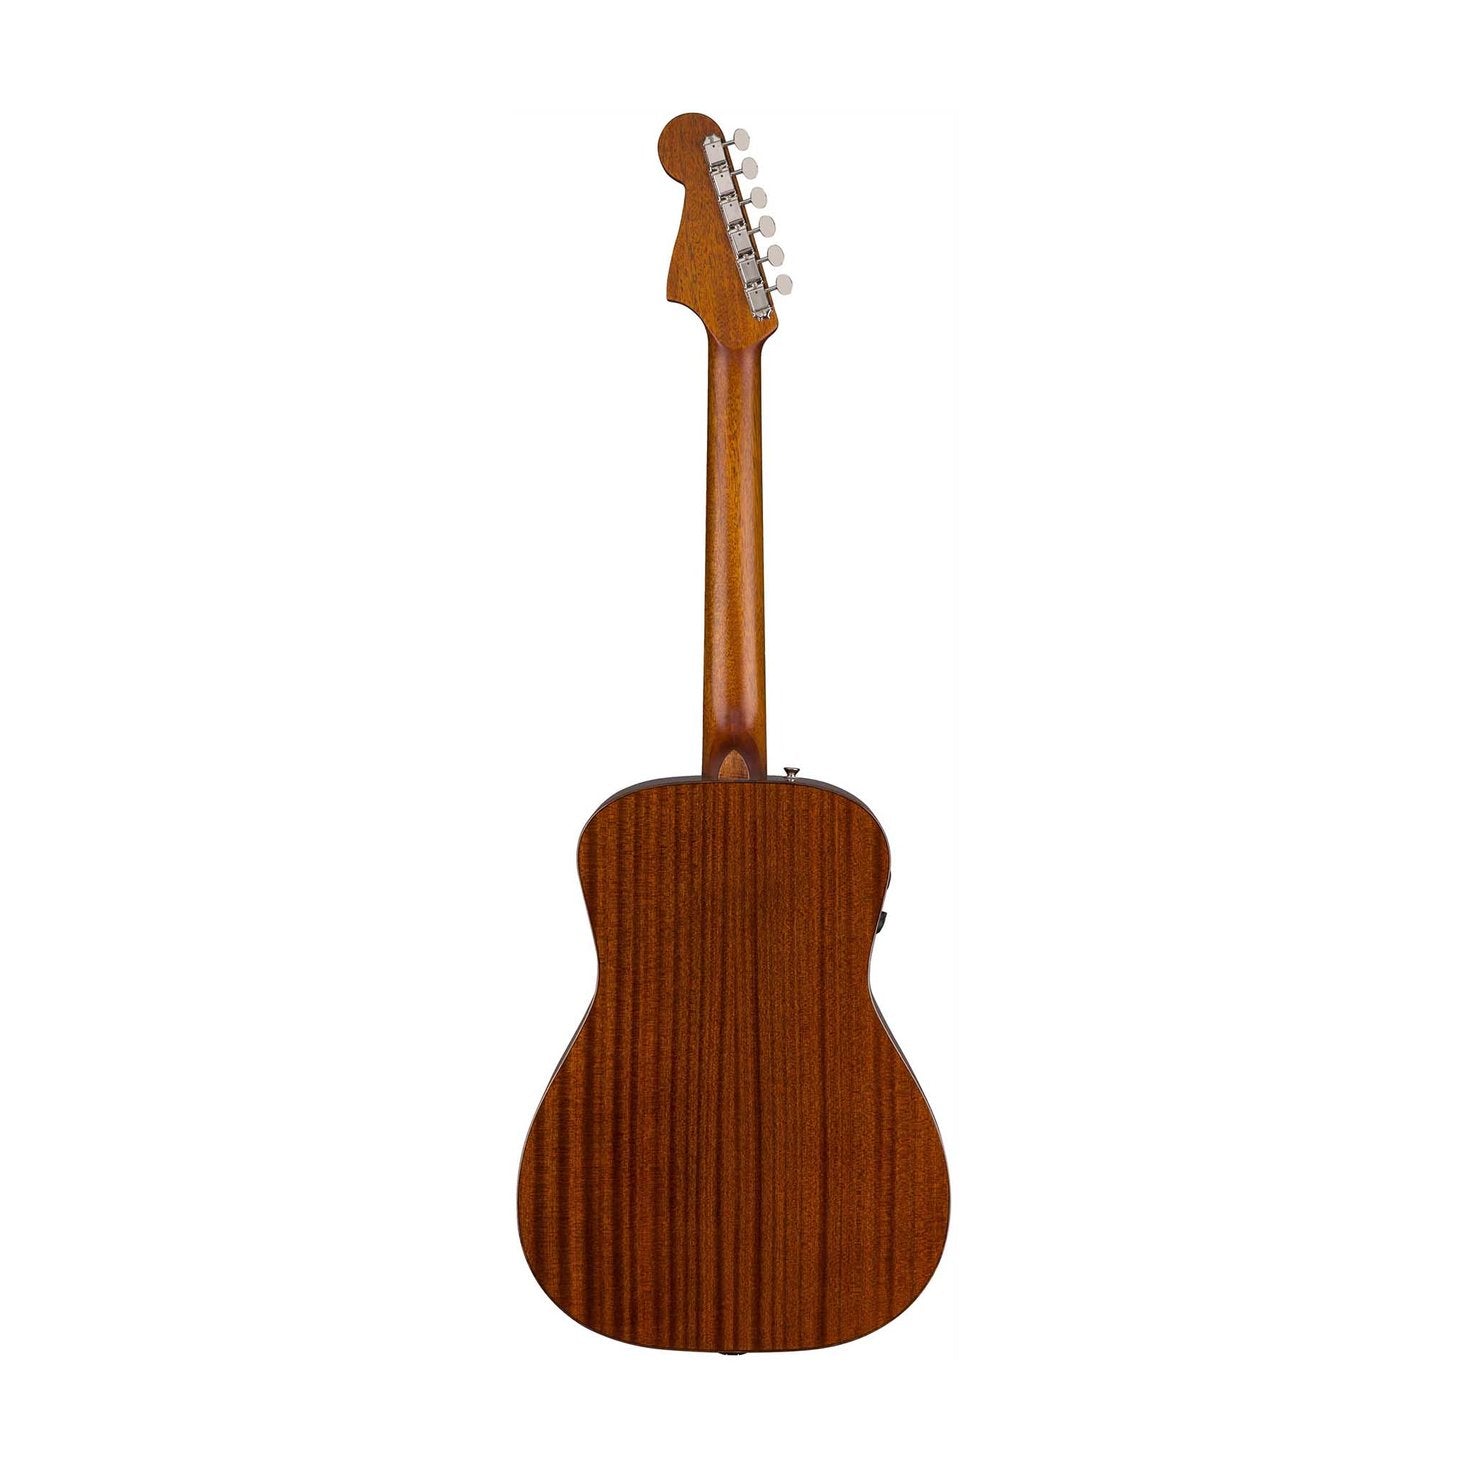 Fender Malibu Classic Small-Bodied Acoustic Guitar w/Bag, Hot Rod Red Metallic, FENDER, ACOUSTIC GUITAR, fender-acoustic-guitar-f03-097-0922-215, ZOSO MUSIC SDN BHD